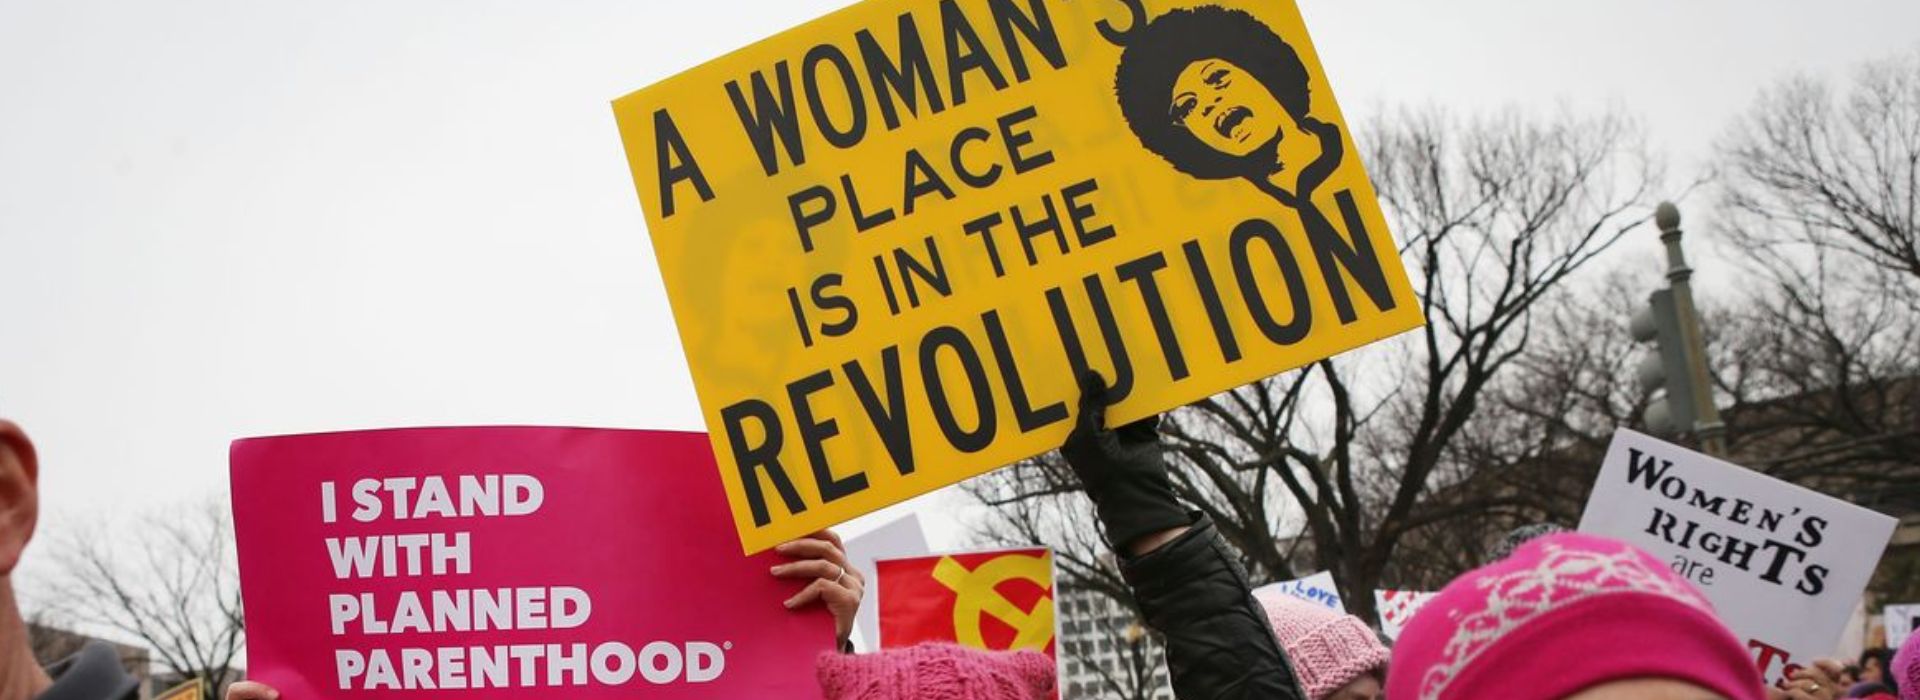 2017 | THE NEW WOMEN-LED RESISTANCE A GLOBAL MOVEMENT